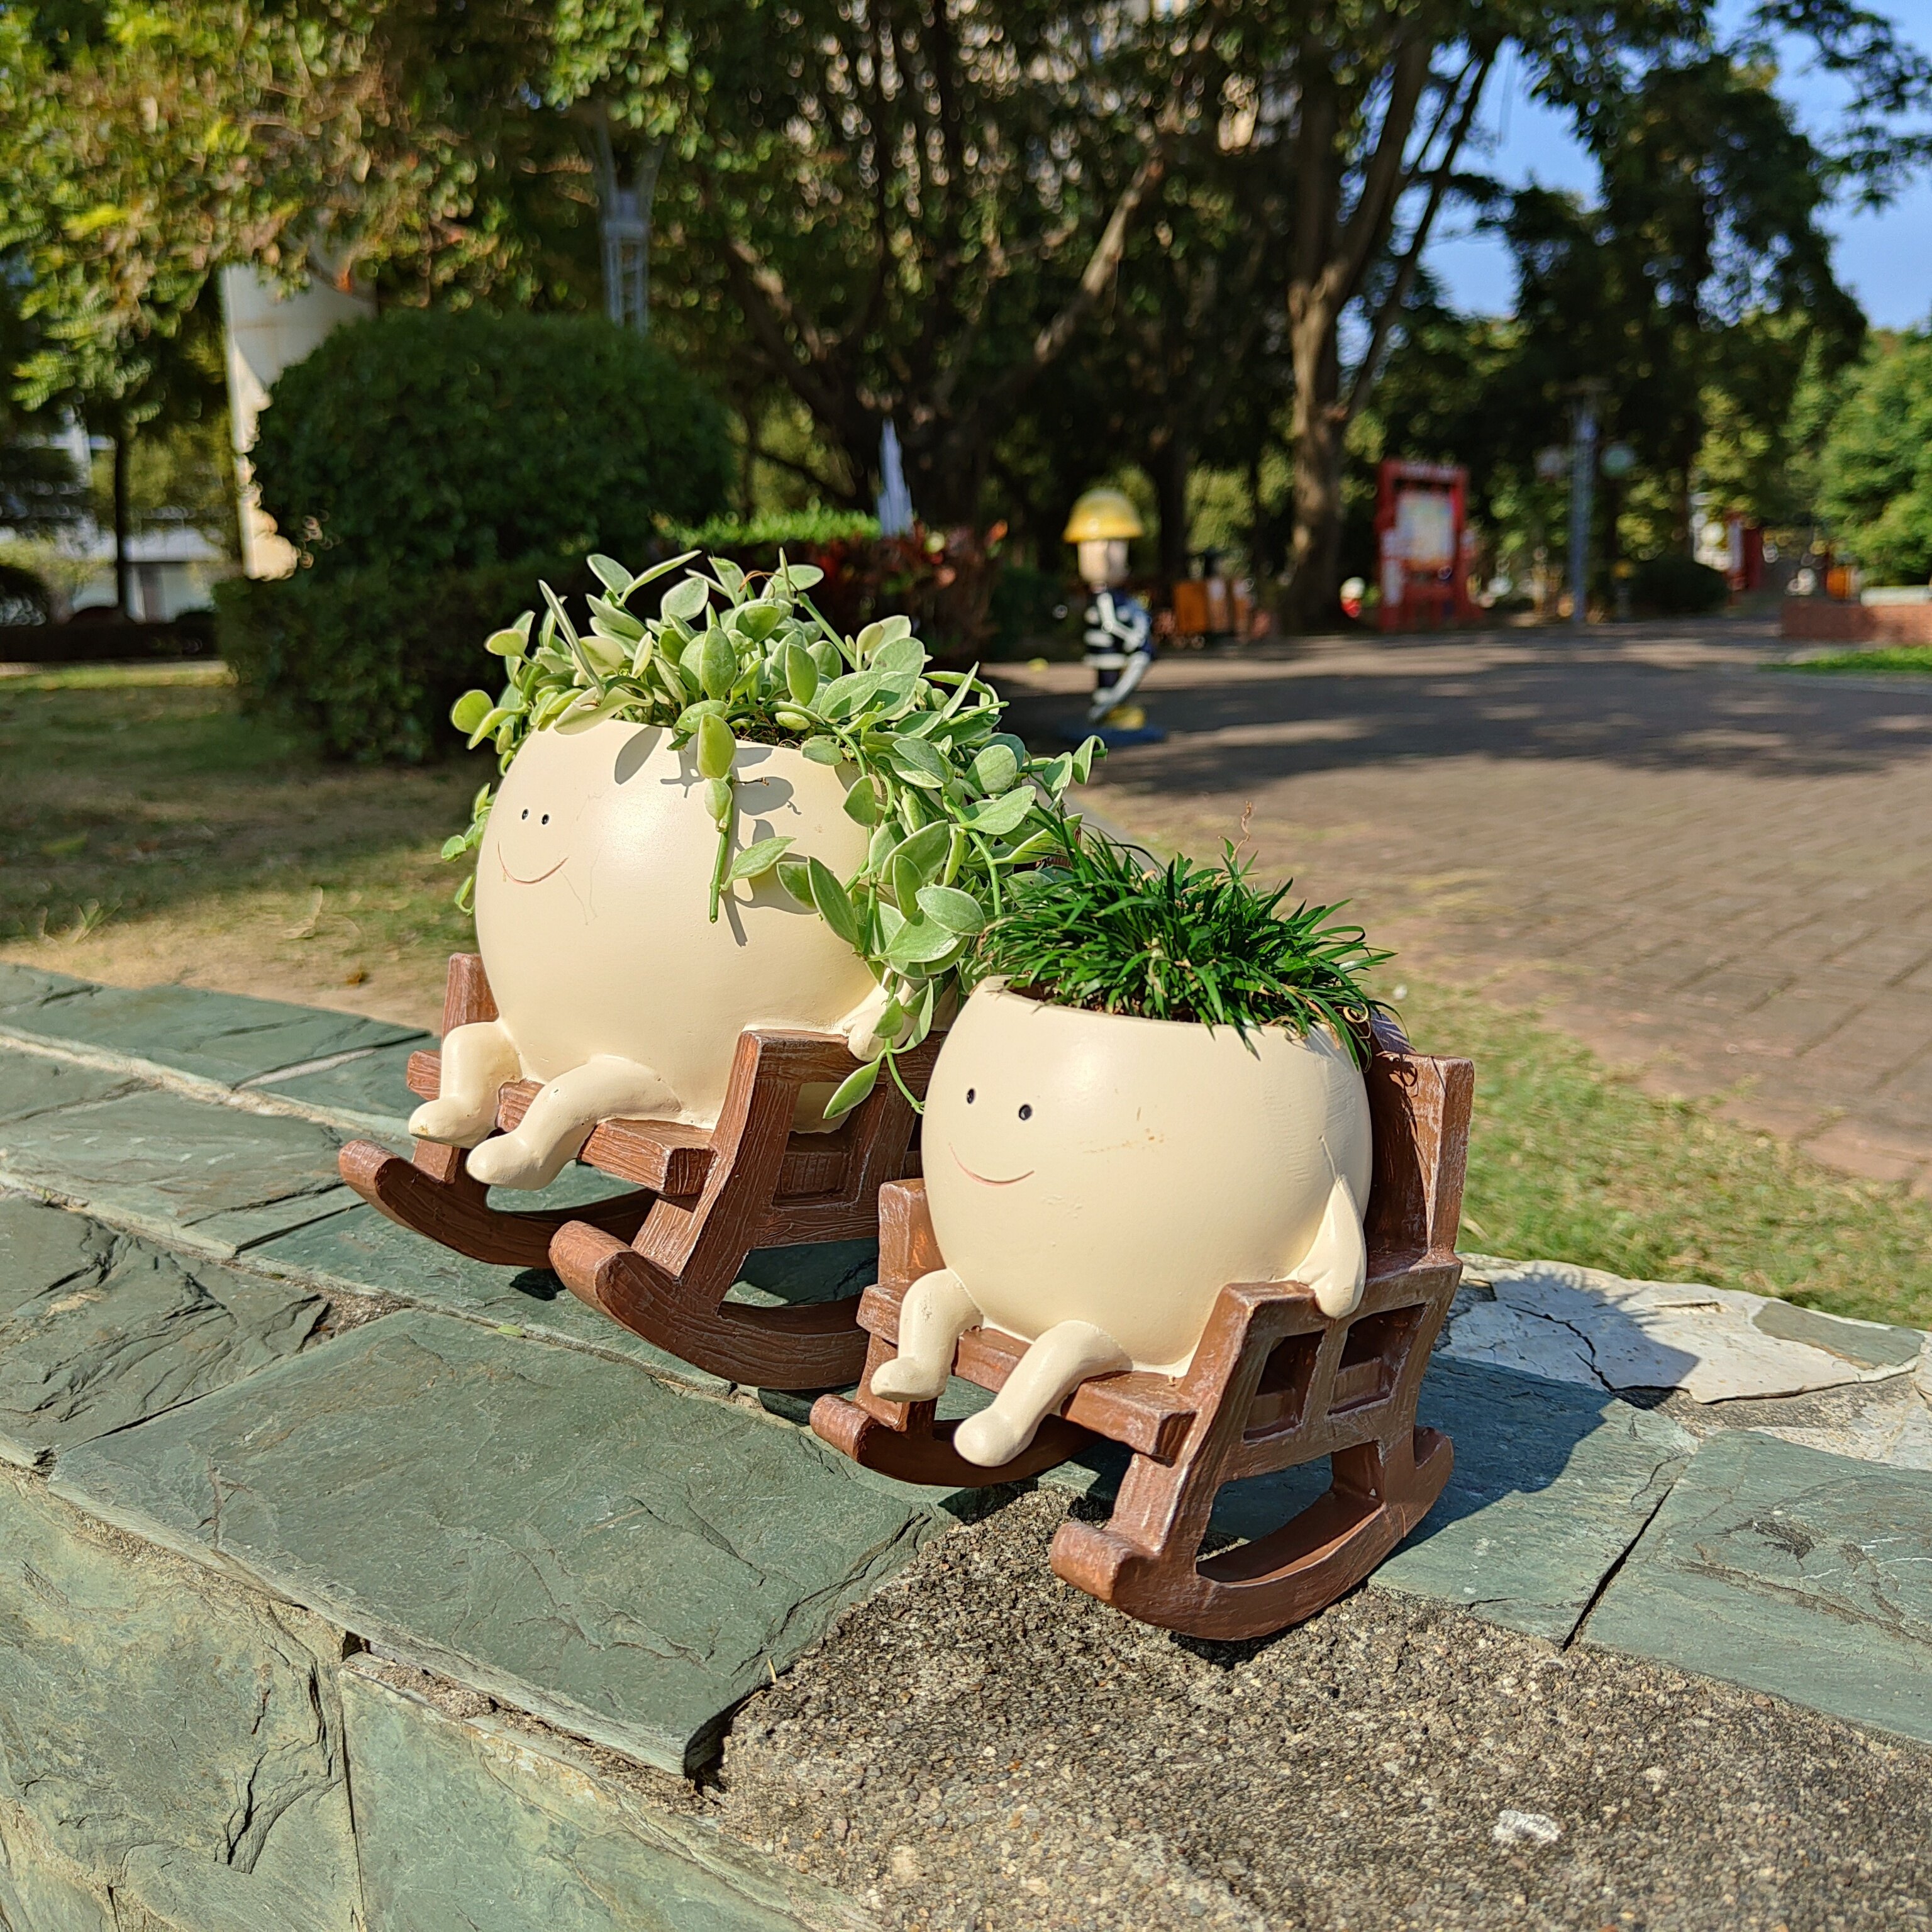 

1pc New Creative Character-shaped Flower Pots, For Large/small Rocking Chairs In The Garden